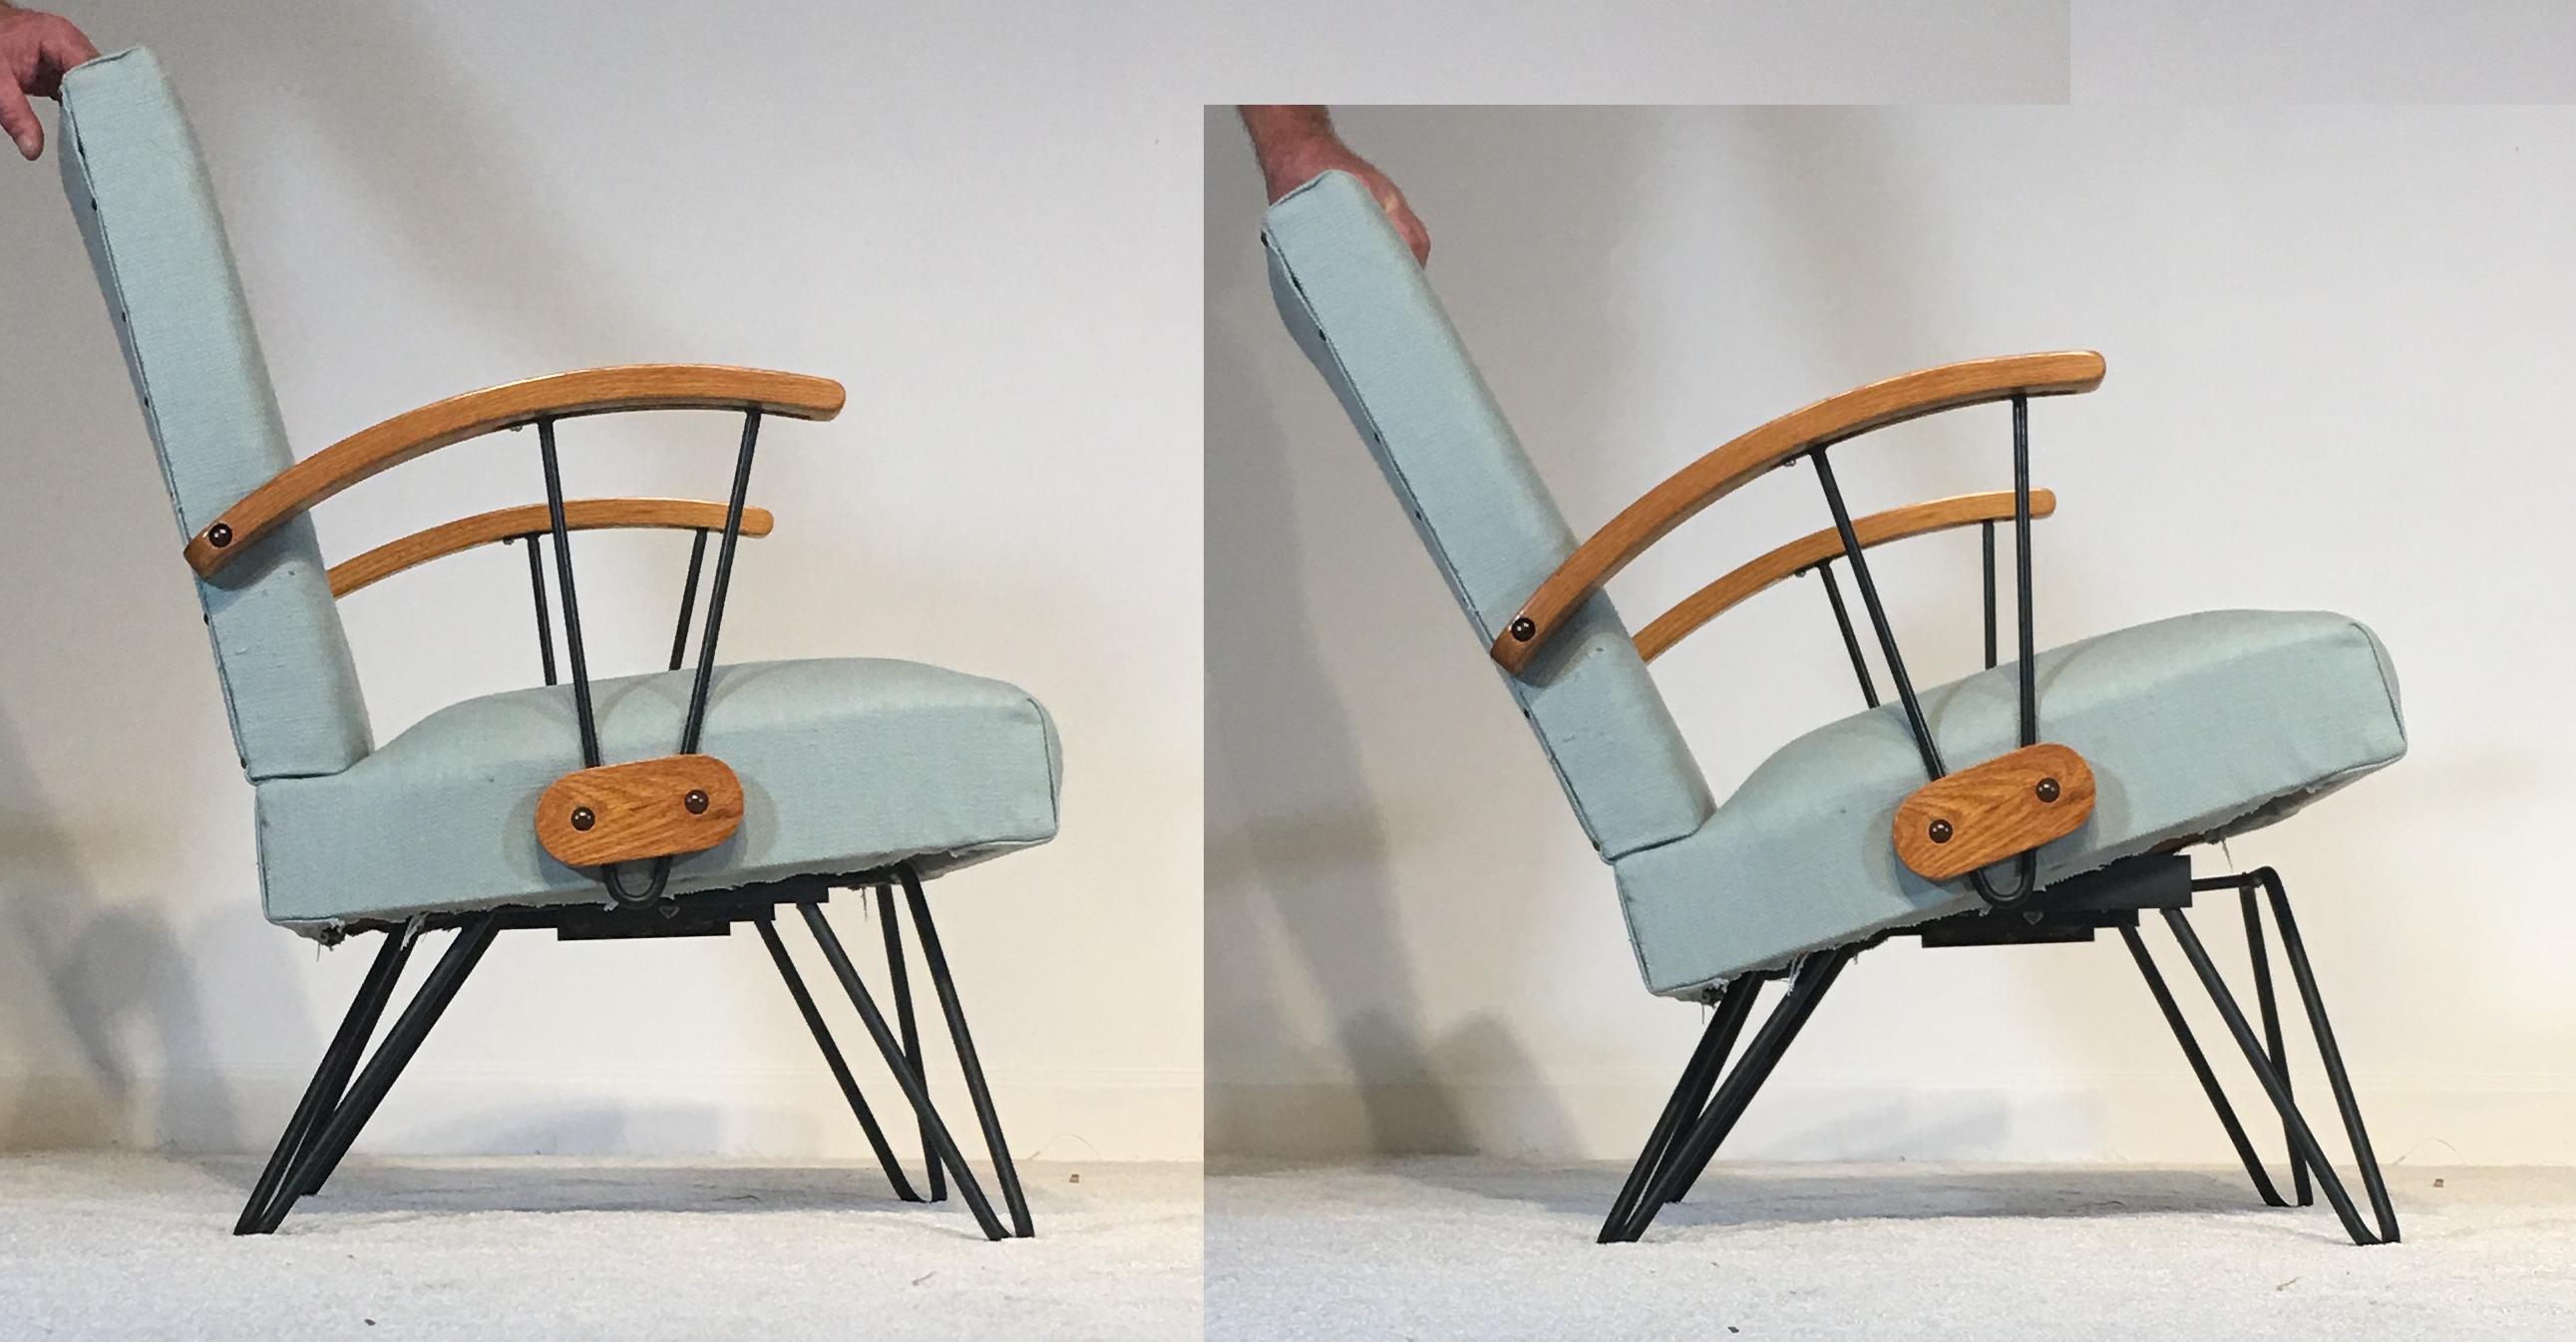 American Midcentury Rocker with Iron Hairpin Legs and Foot Stool